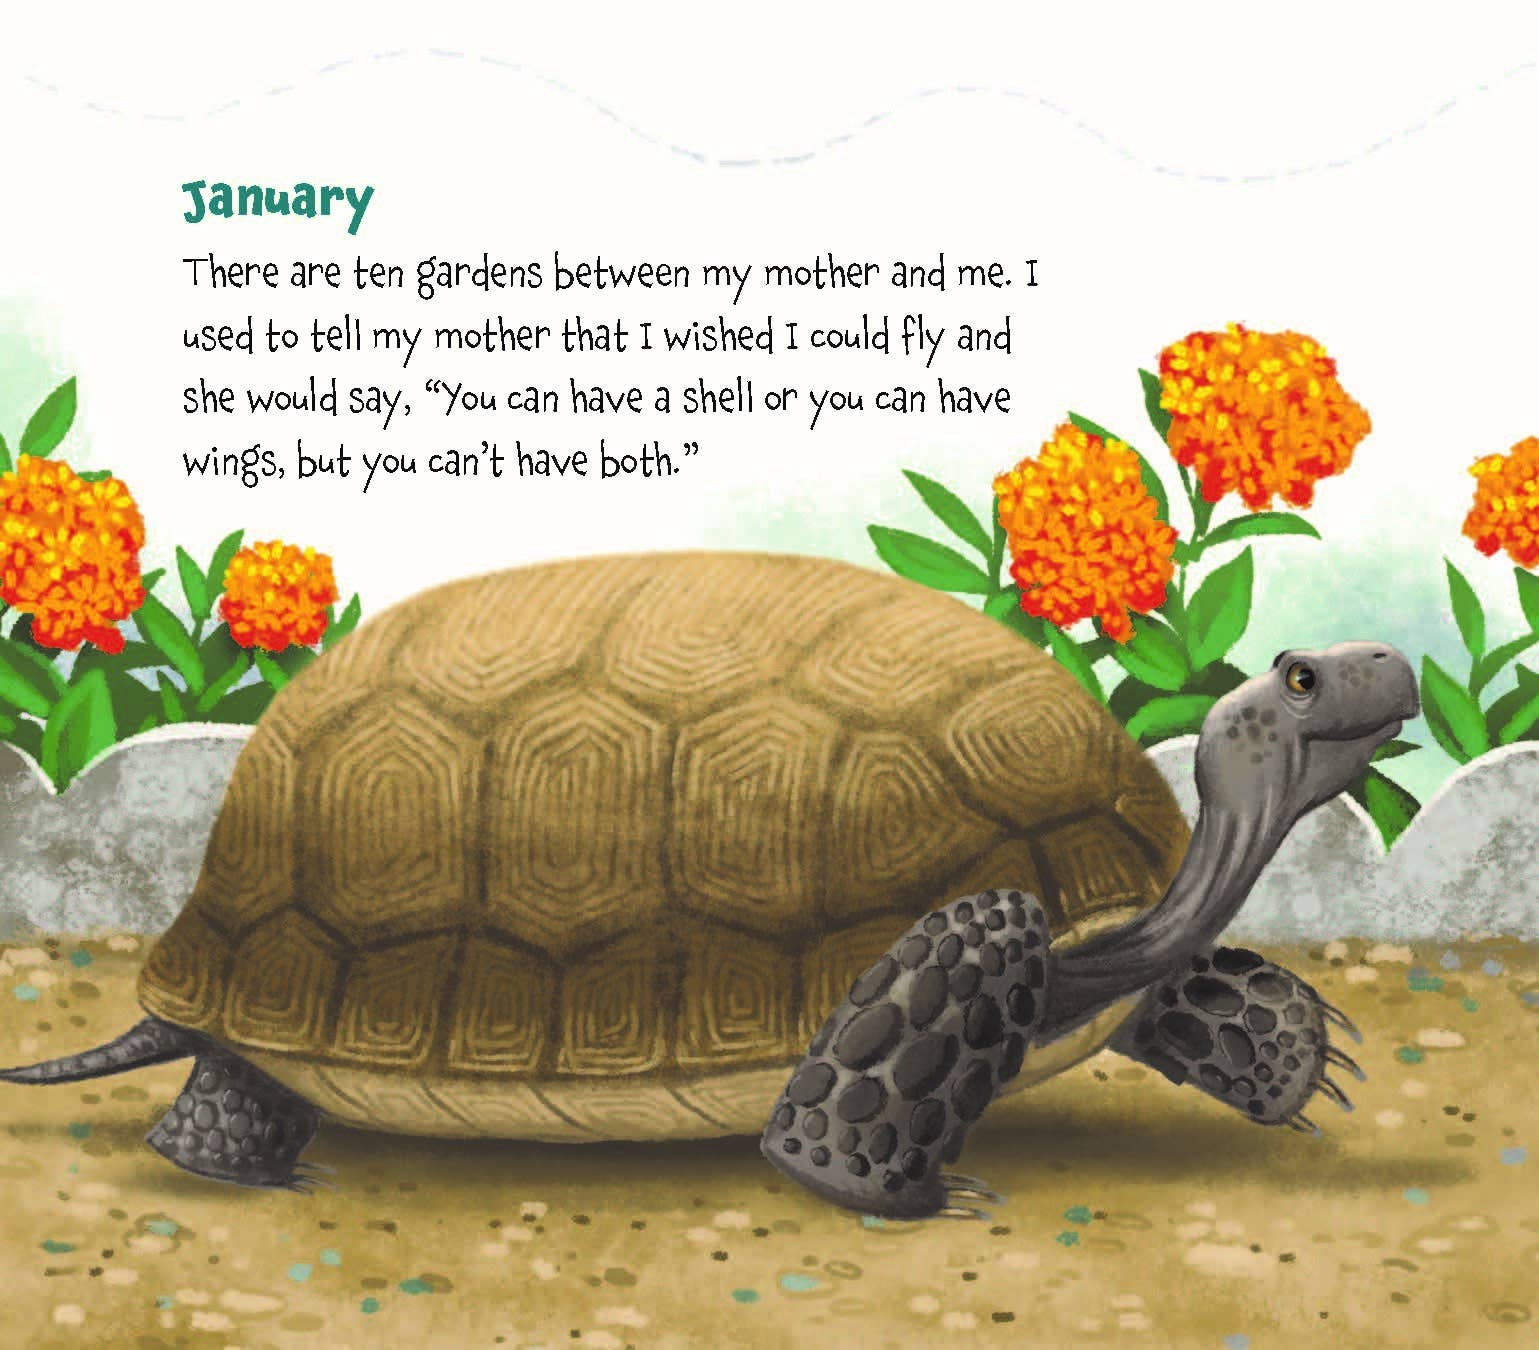 Memoirs of a Tortoise, a picture book